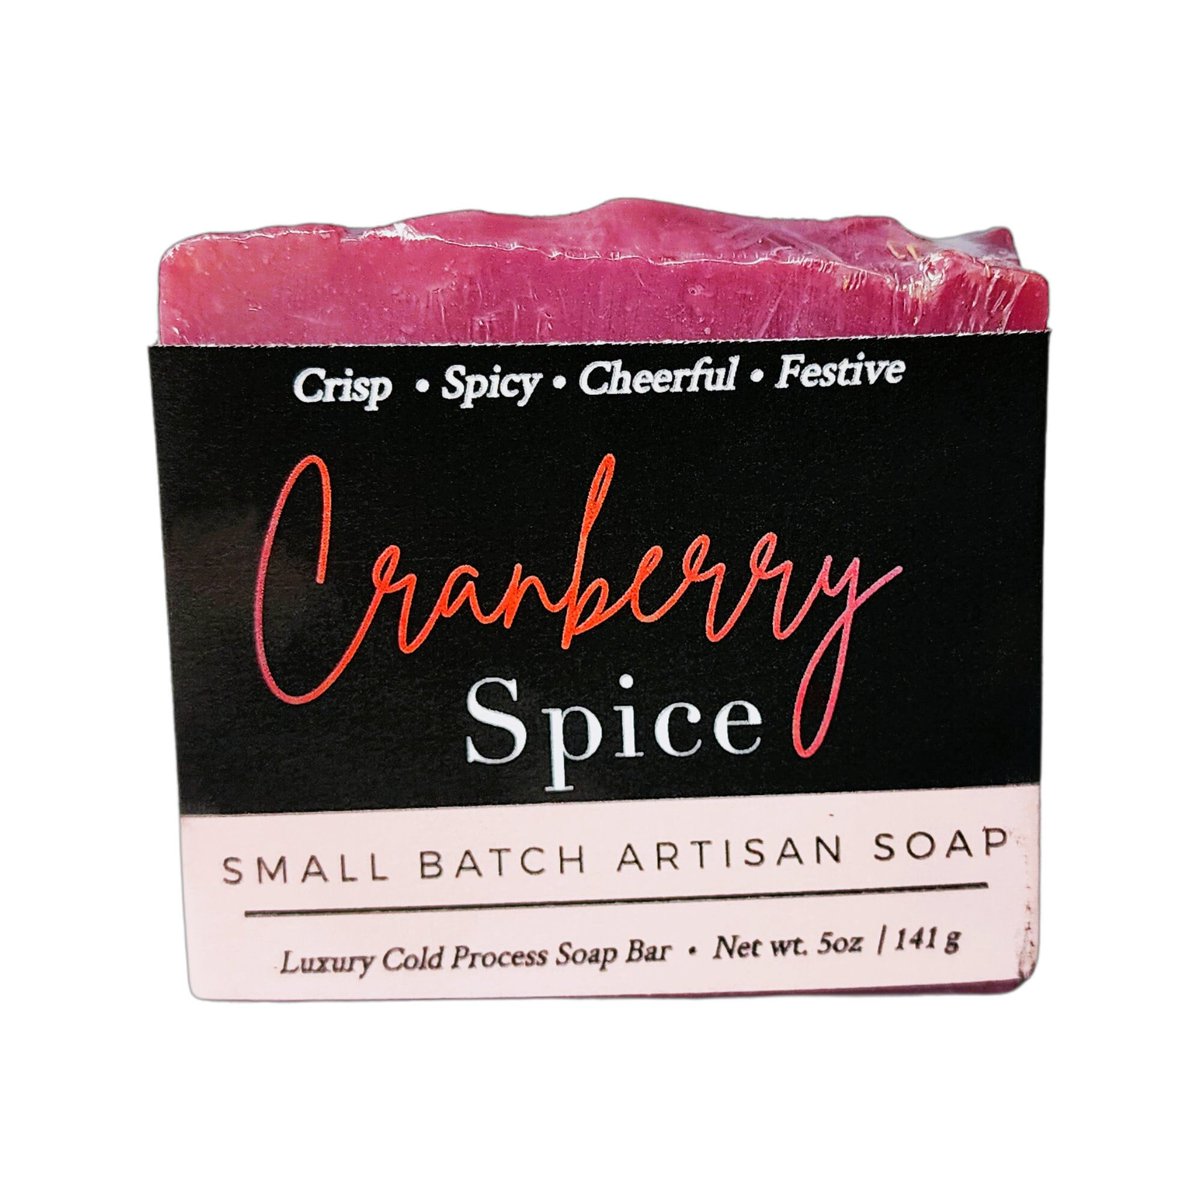 Cranberry Spice Soap, Soap Gift, Cranberry Soap, Spice Soap, Vegan Soap, Natural Soap, Cold Process Soap,  , Valentine's Day Gift tuppu.net/3f2d97f0 #Etsy #Christmasgifts #soap #gifts #handmadesoap #Soapgift #DeShawnMarie #SkinCare